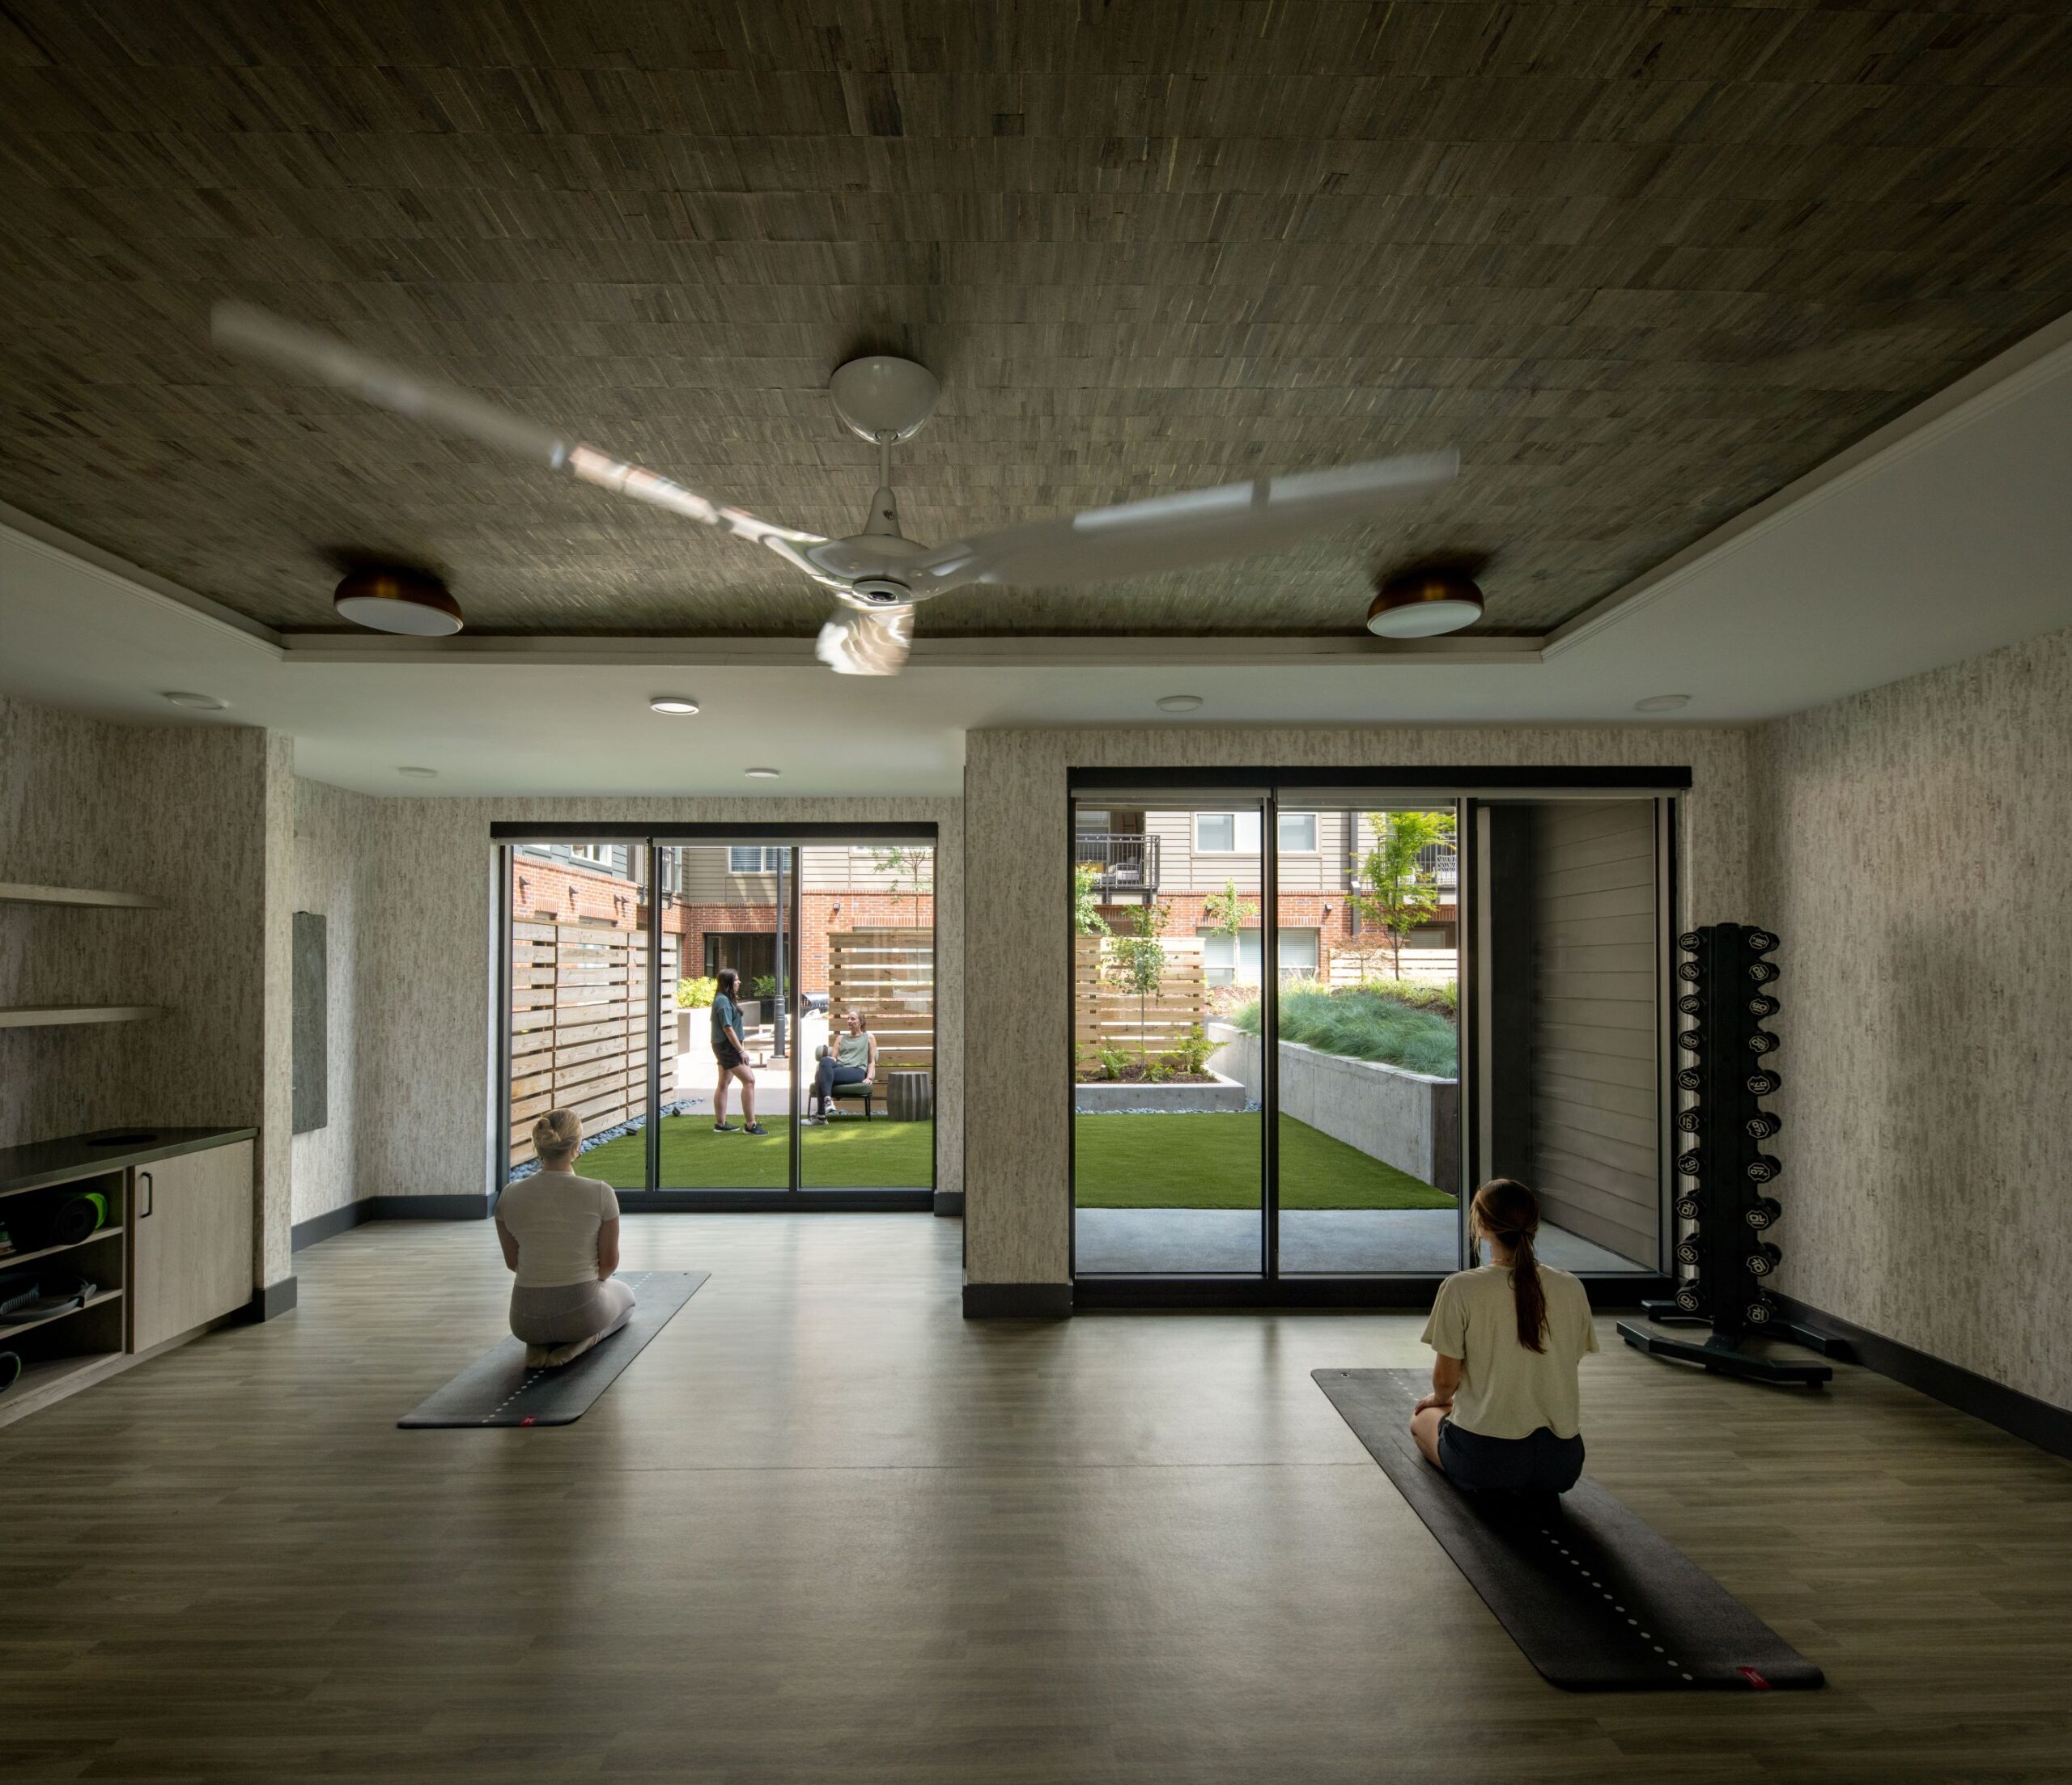 Meditation and yoga area looking into outdoor centra courtyard